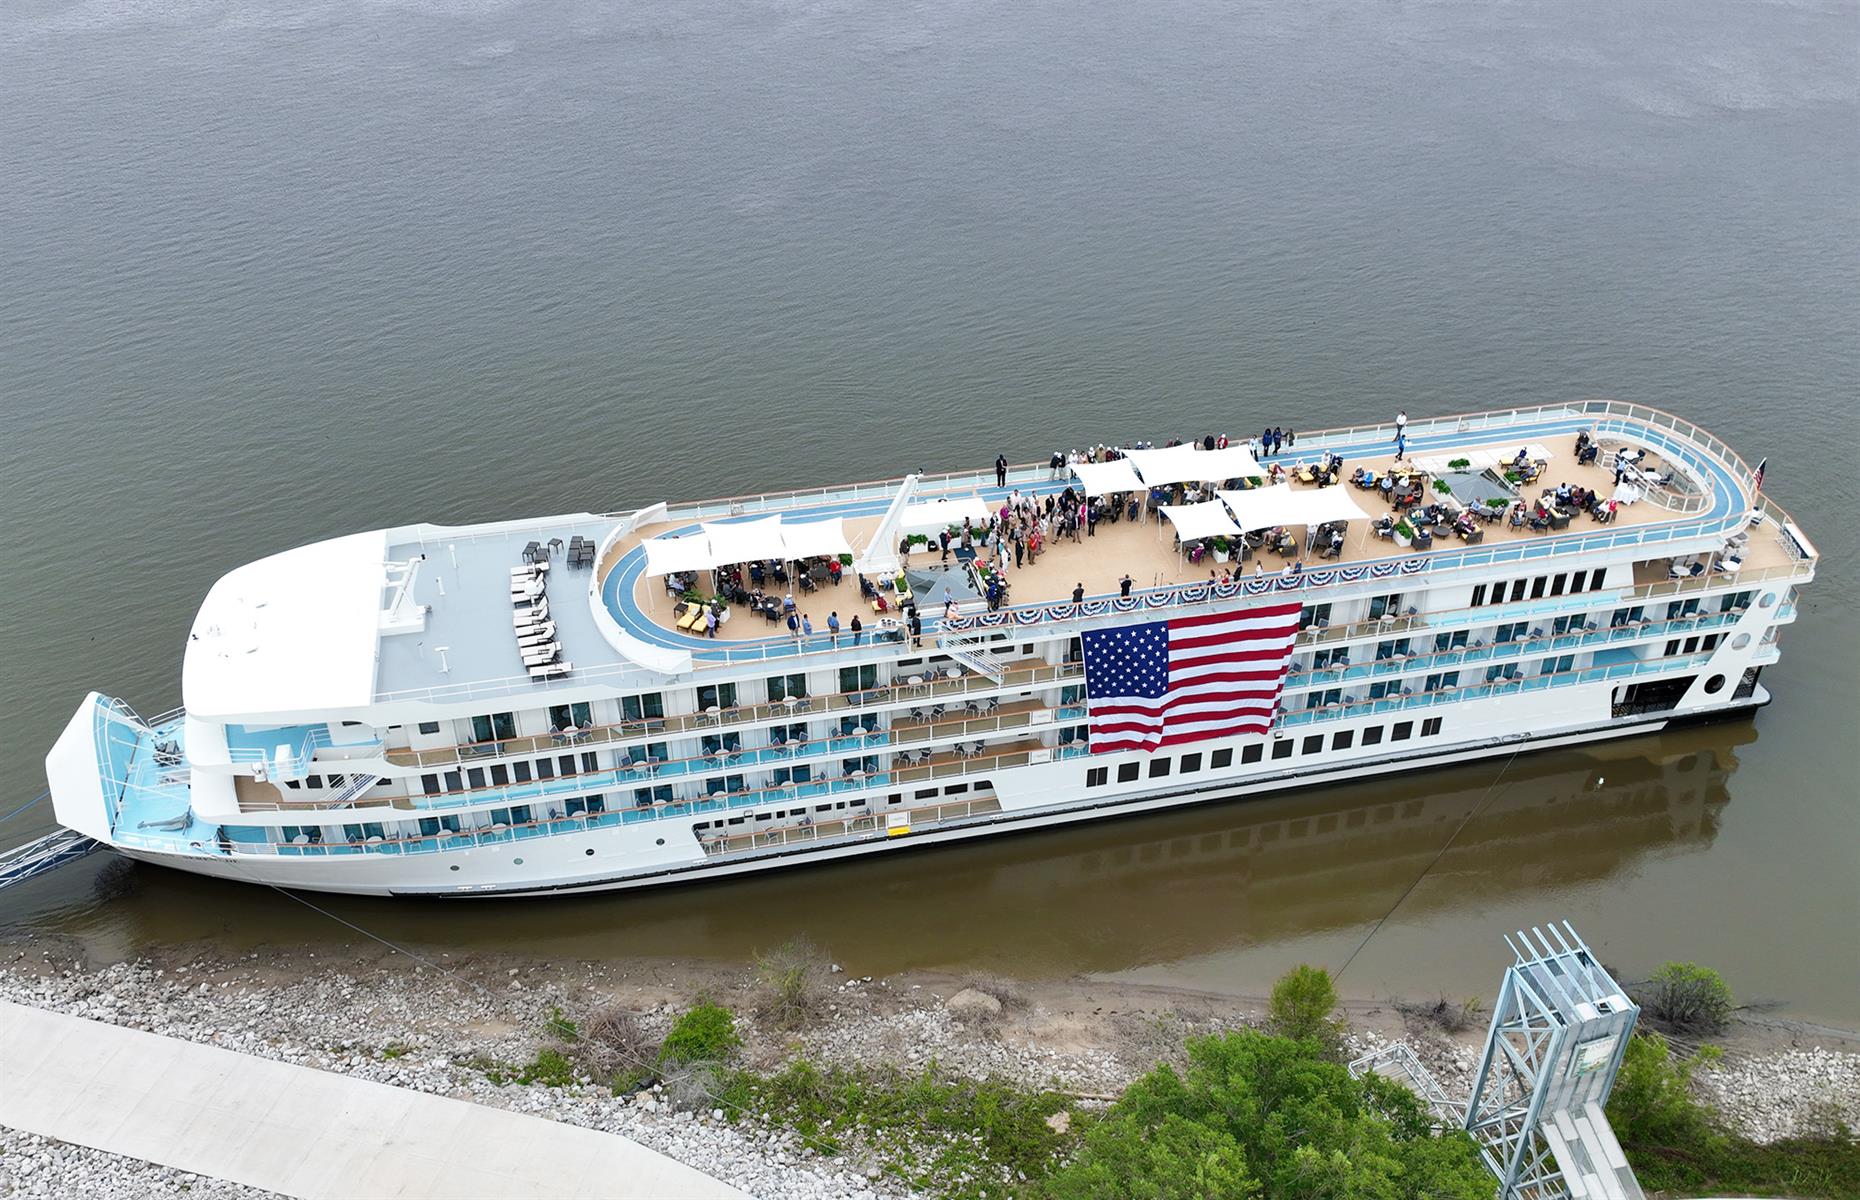 <p>There are some great day trips that give you a hint of life along the Mississippi, but for a deep dive into all things America, a longer sailing will let you sit back and soak up the scenery. American Cruise Lines has a whopping 16-day Great Heartland Cruise that is a roll call of American greatness, starting from $10,490 per person. Start in St Paul, Minnesota, before heading to New Orleans via Tunica, Vicksburg and Natchez, all aboard a traditional paddlewheel riverboat with space for just 150 guests. Huckleberry Finn, eat your heart out. </p>